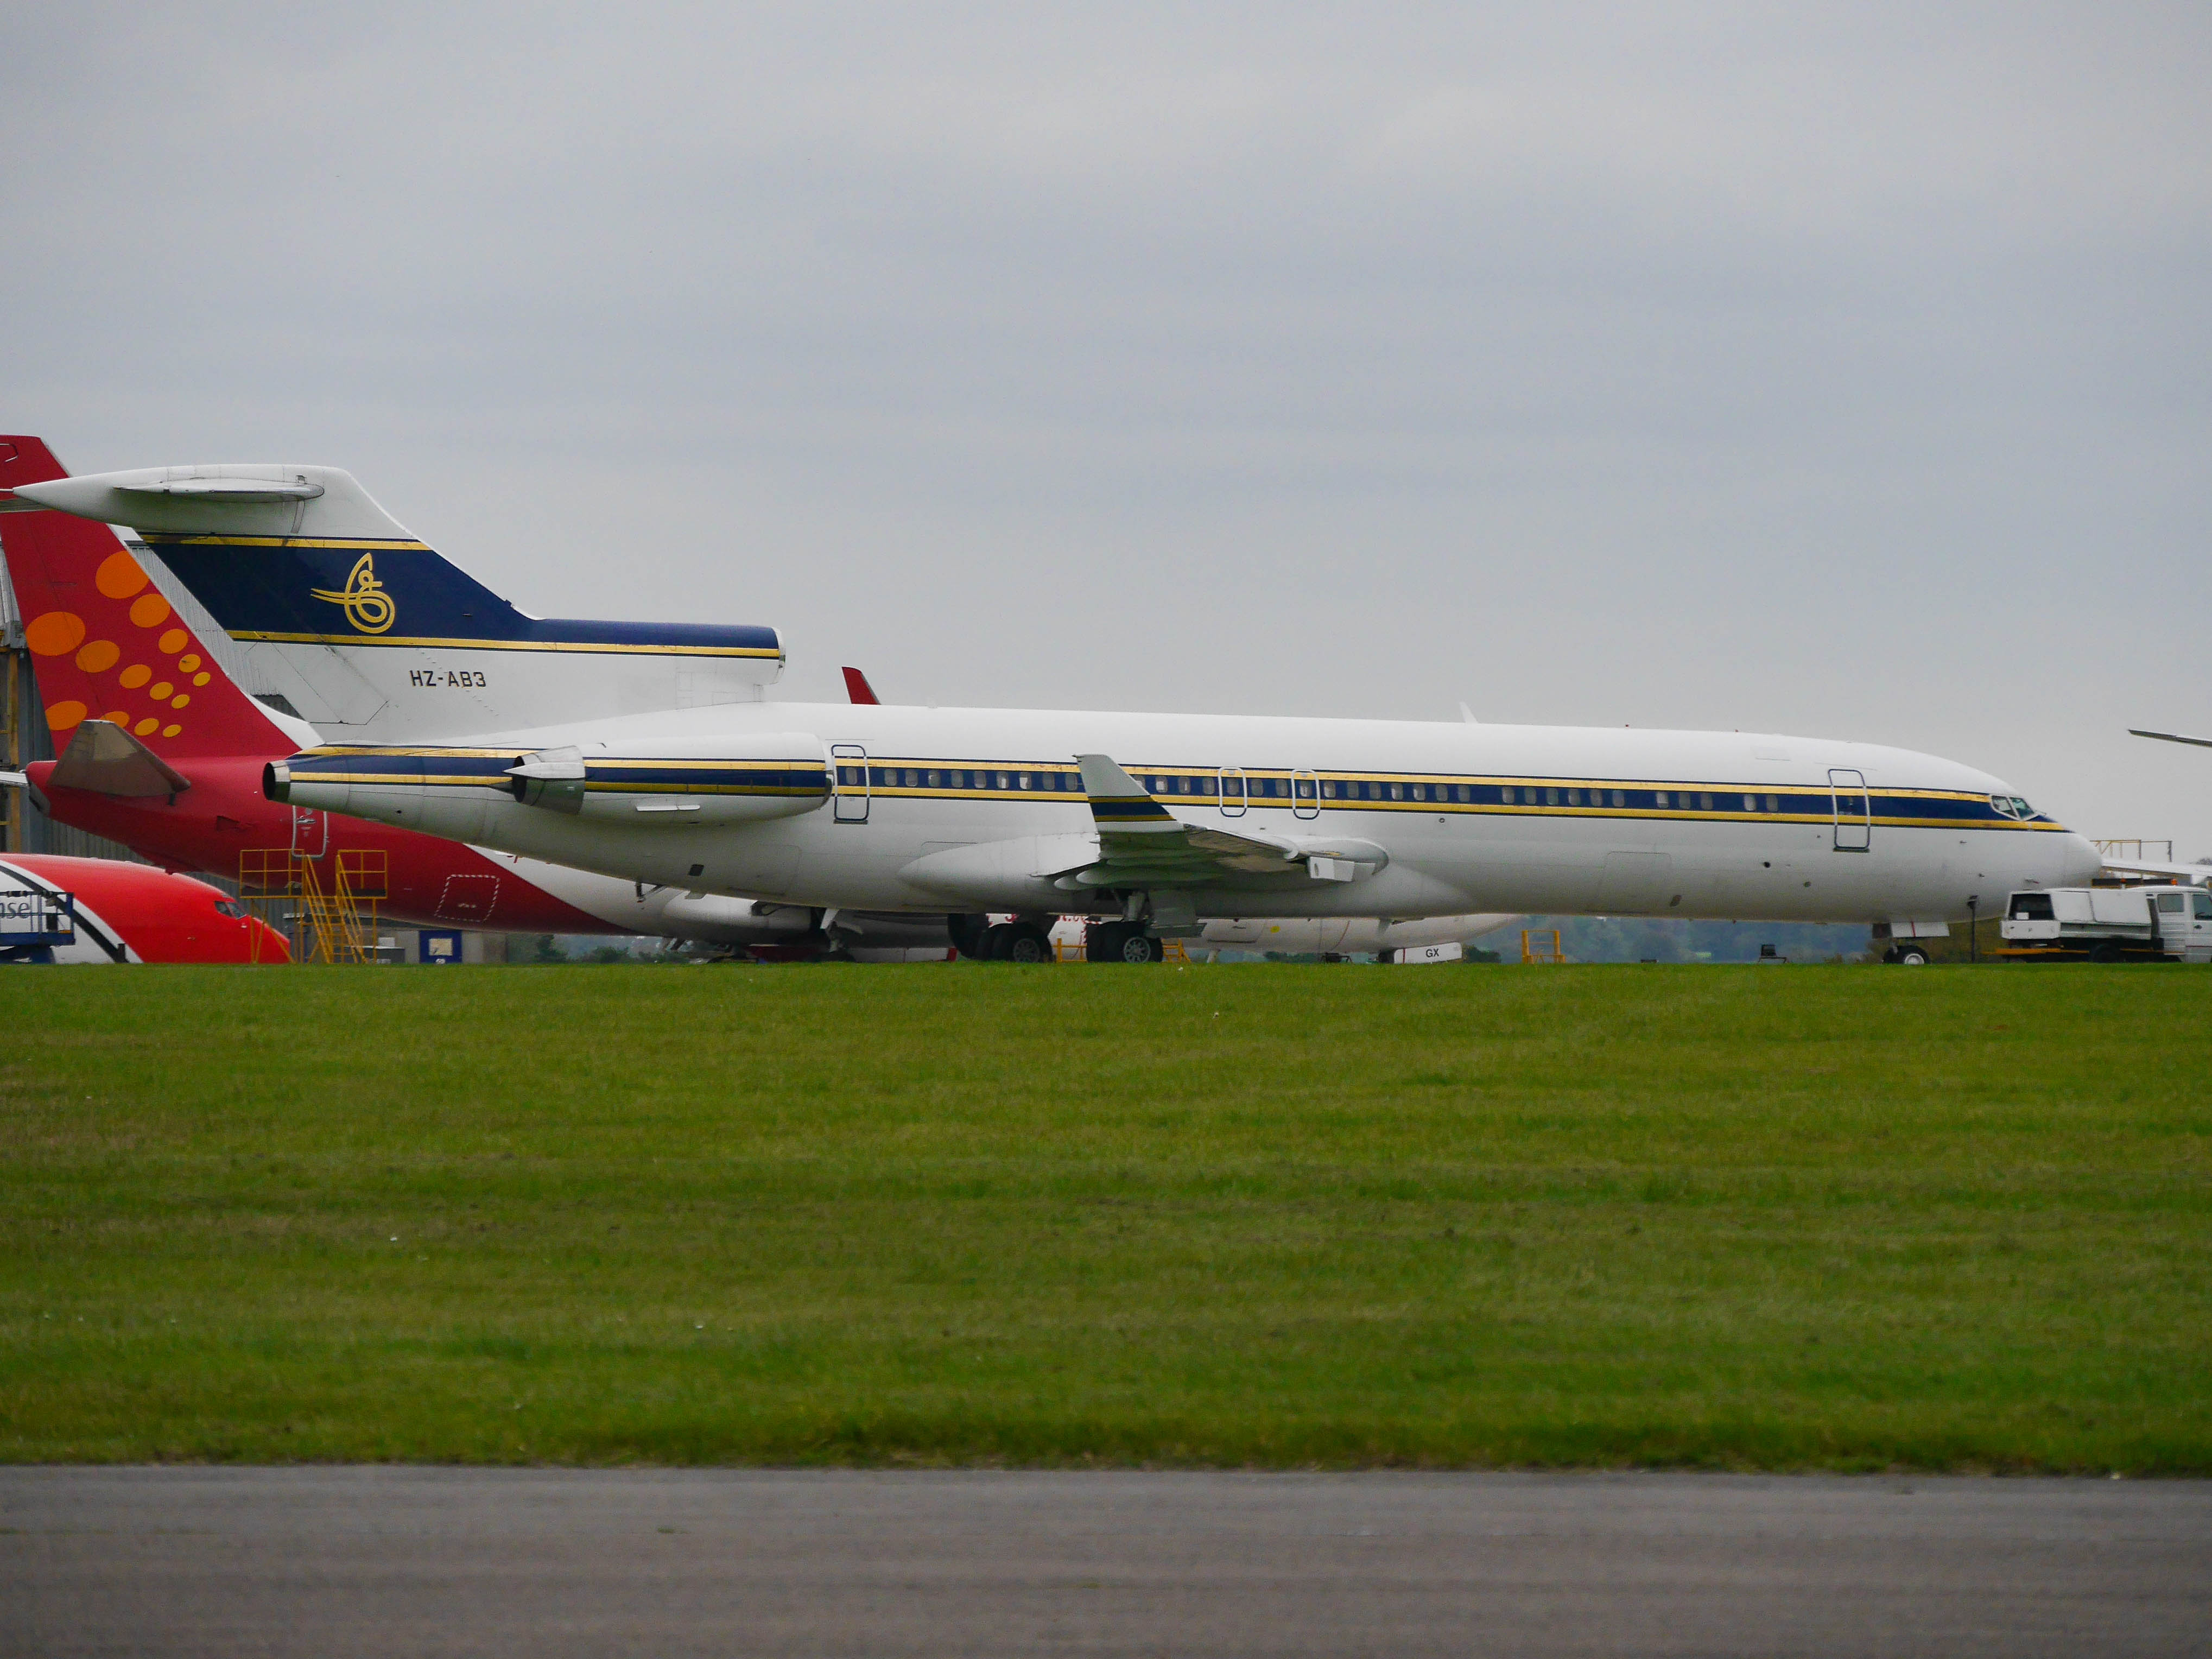 HZ-AB3 /HZAB3  Corporate Boeing 727-2U5RE(WL) Photo by colinw - AVSpotters.com